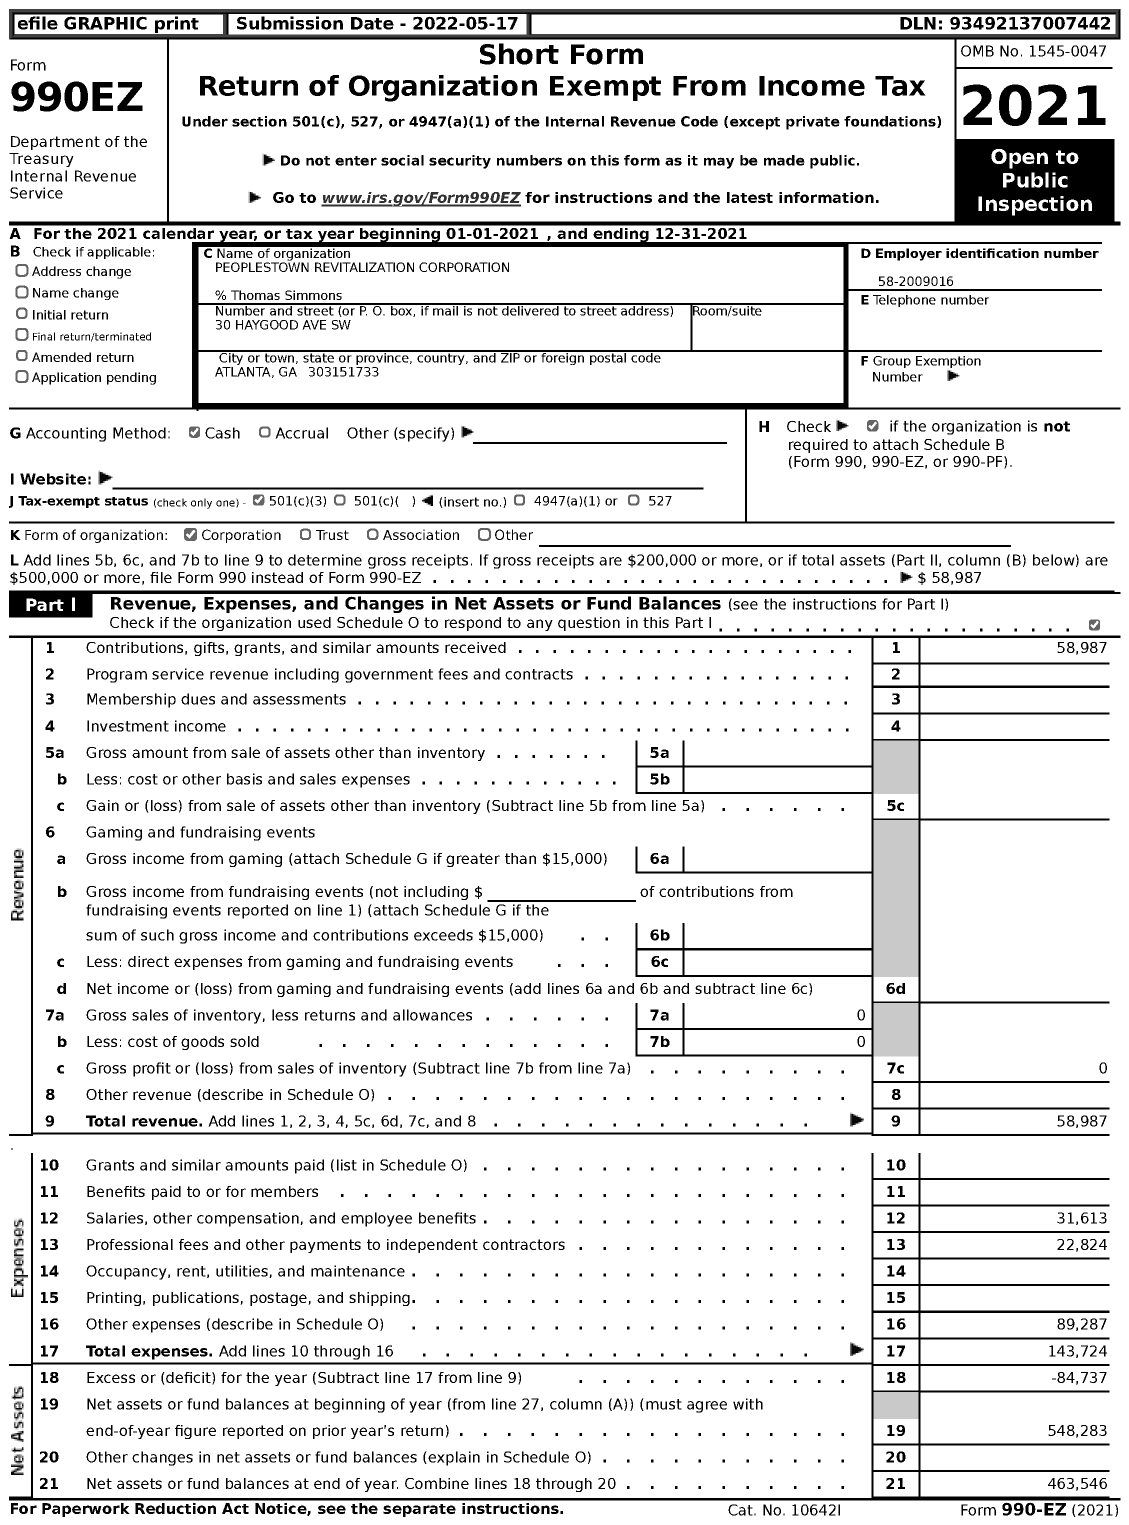 Image of first page of 2021 Form 990EZ for Peoplestown Revitalization Corporation